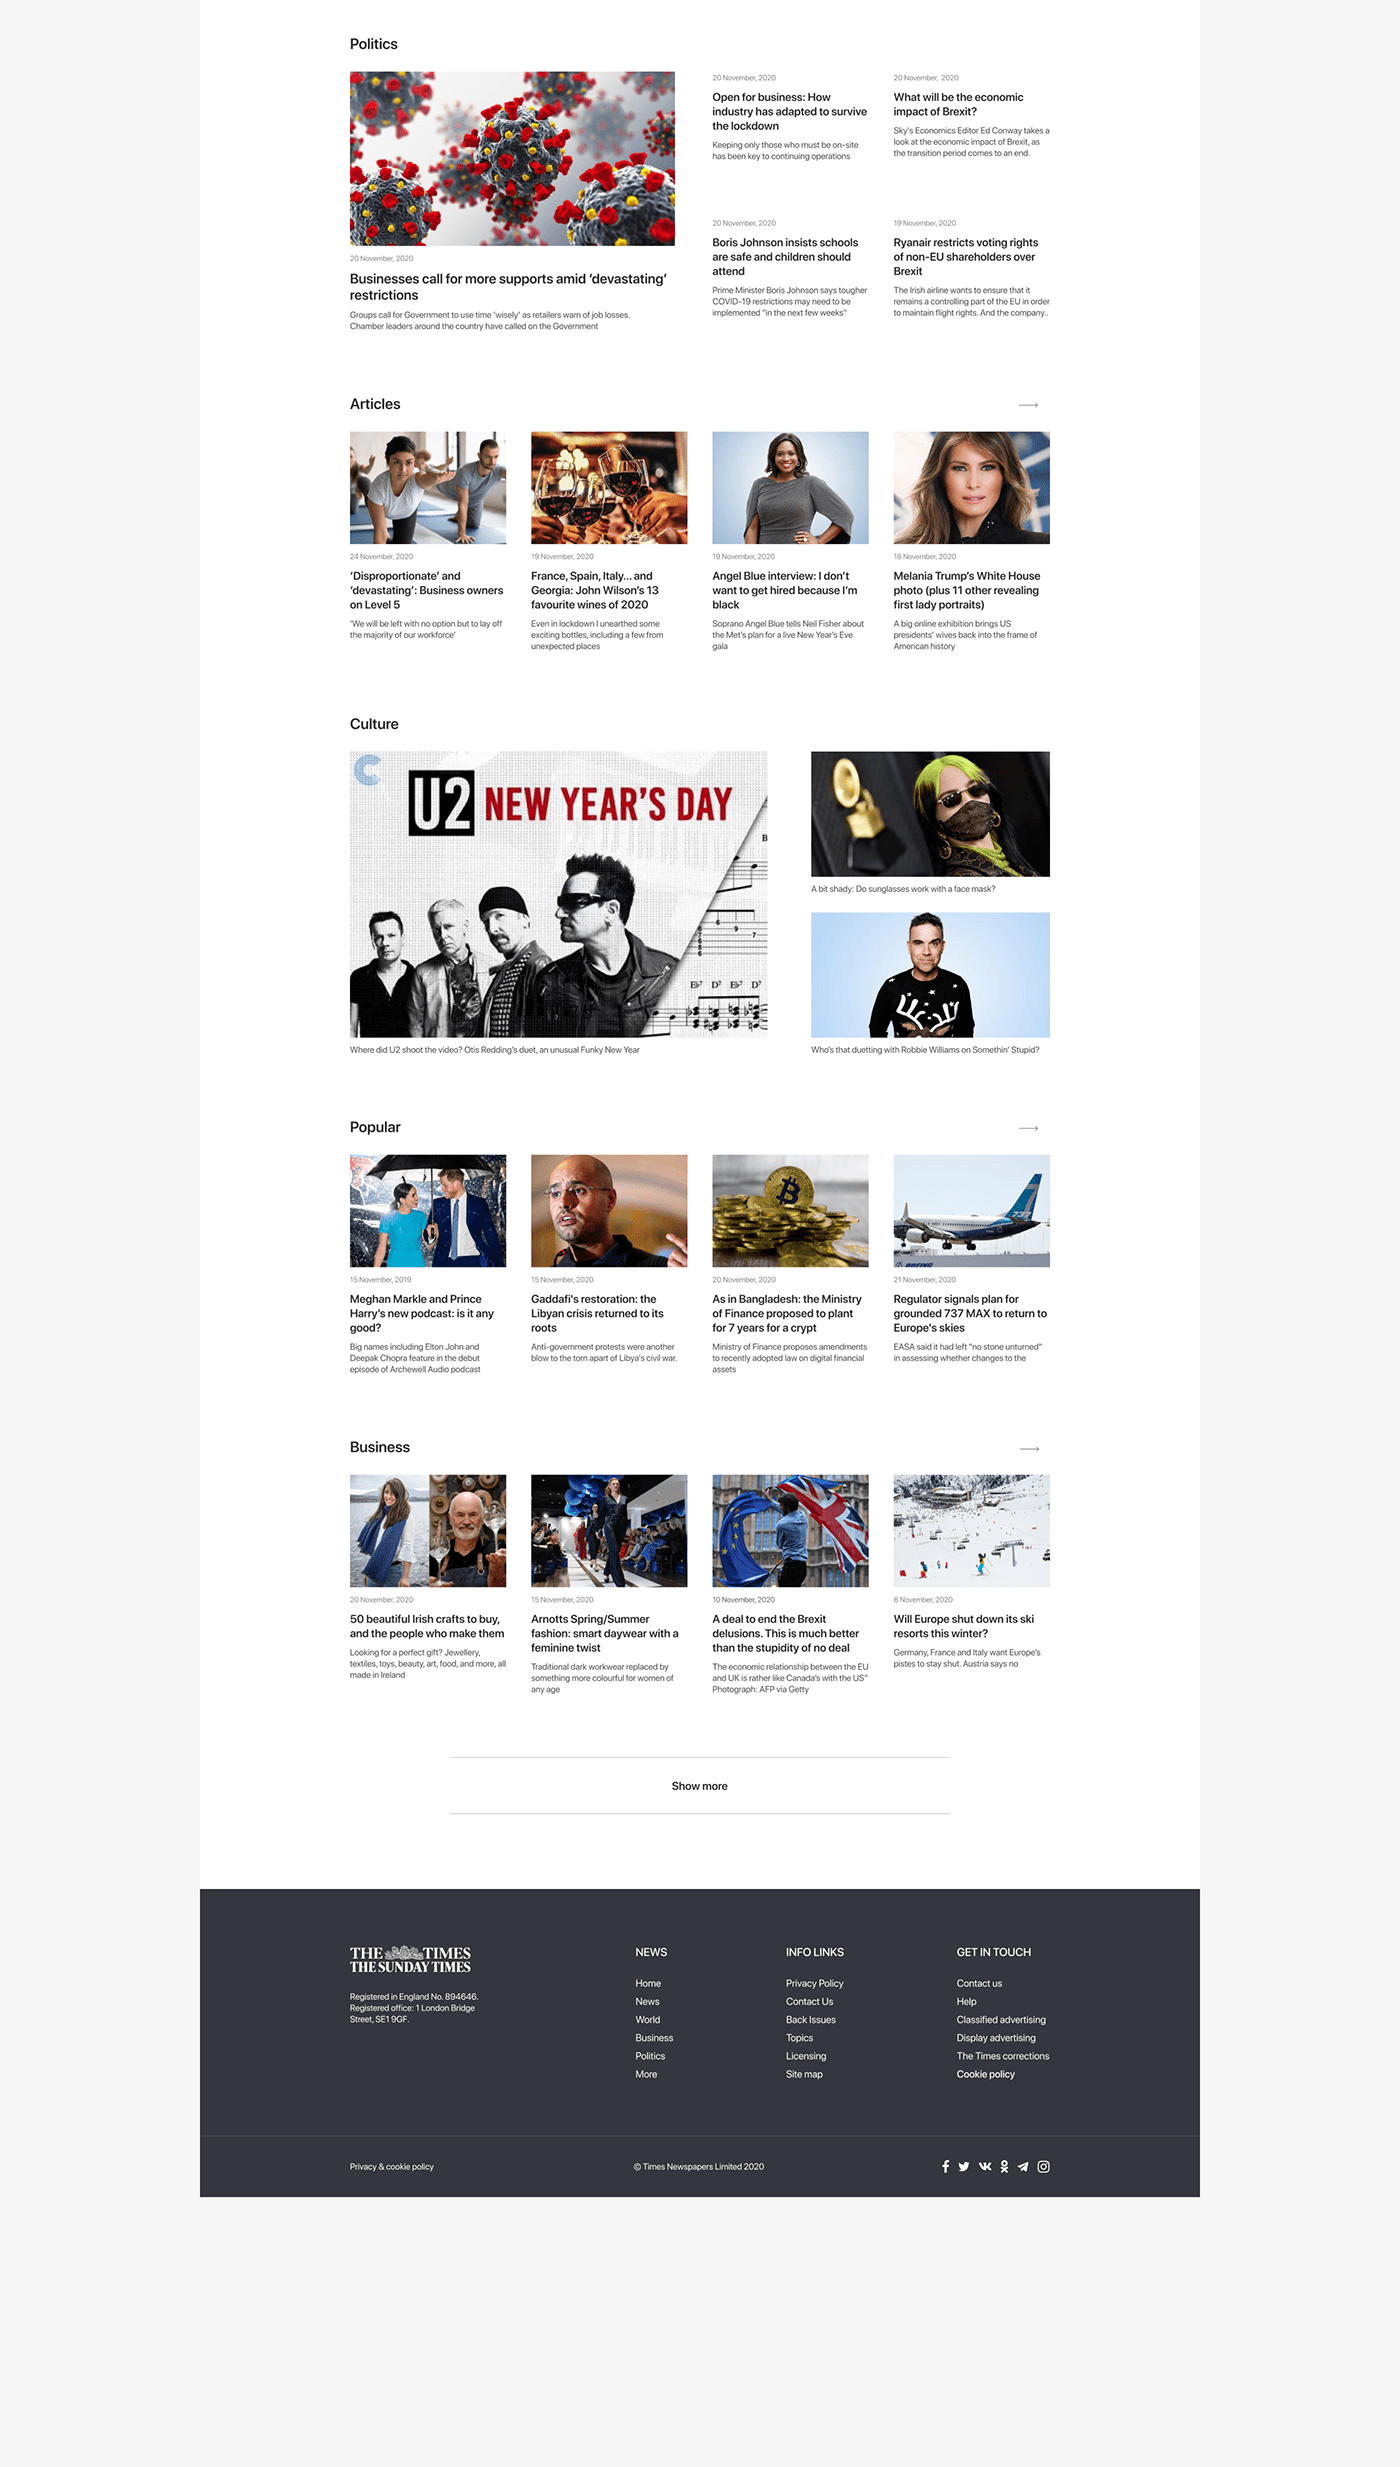 The Times — News website redesign